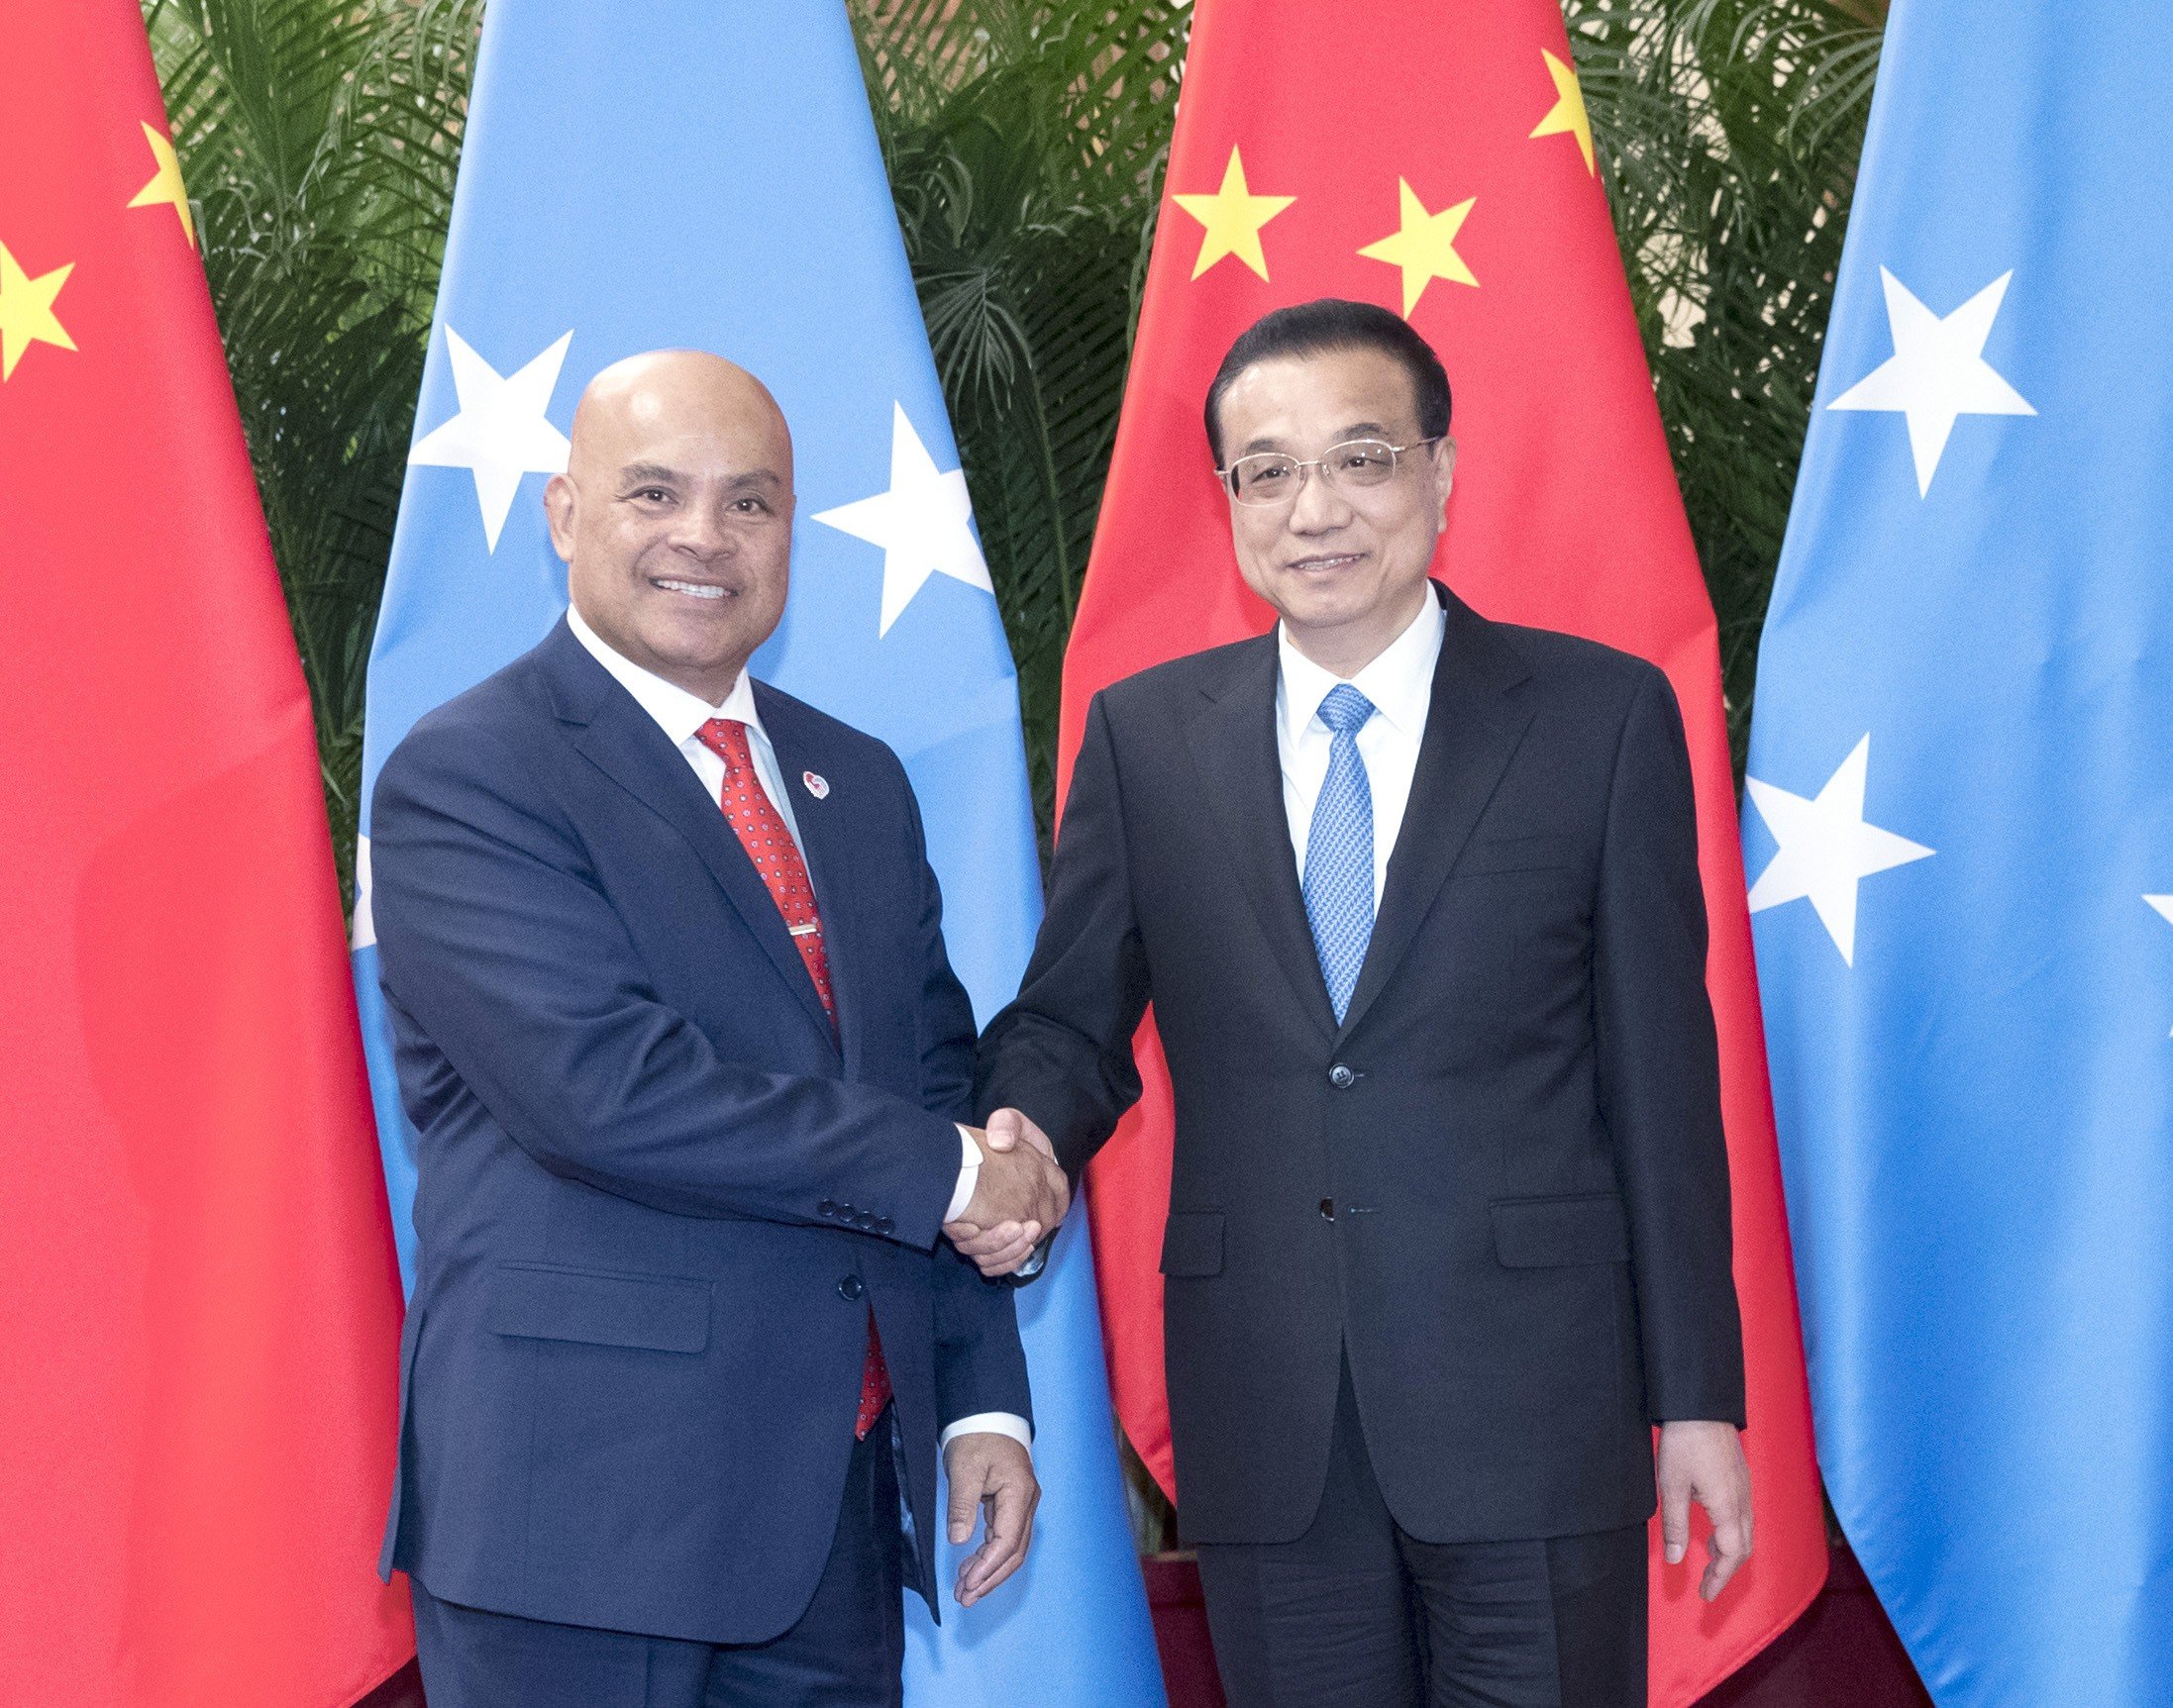 President of the Federated States of Micronesia David Panuelo shakes hands with Chinese Premier Li Keqiang at the Great Hall of the People in Beijing. Photo: Xinhua